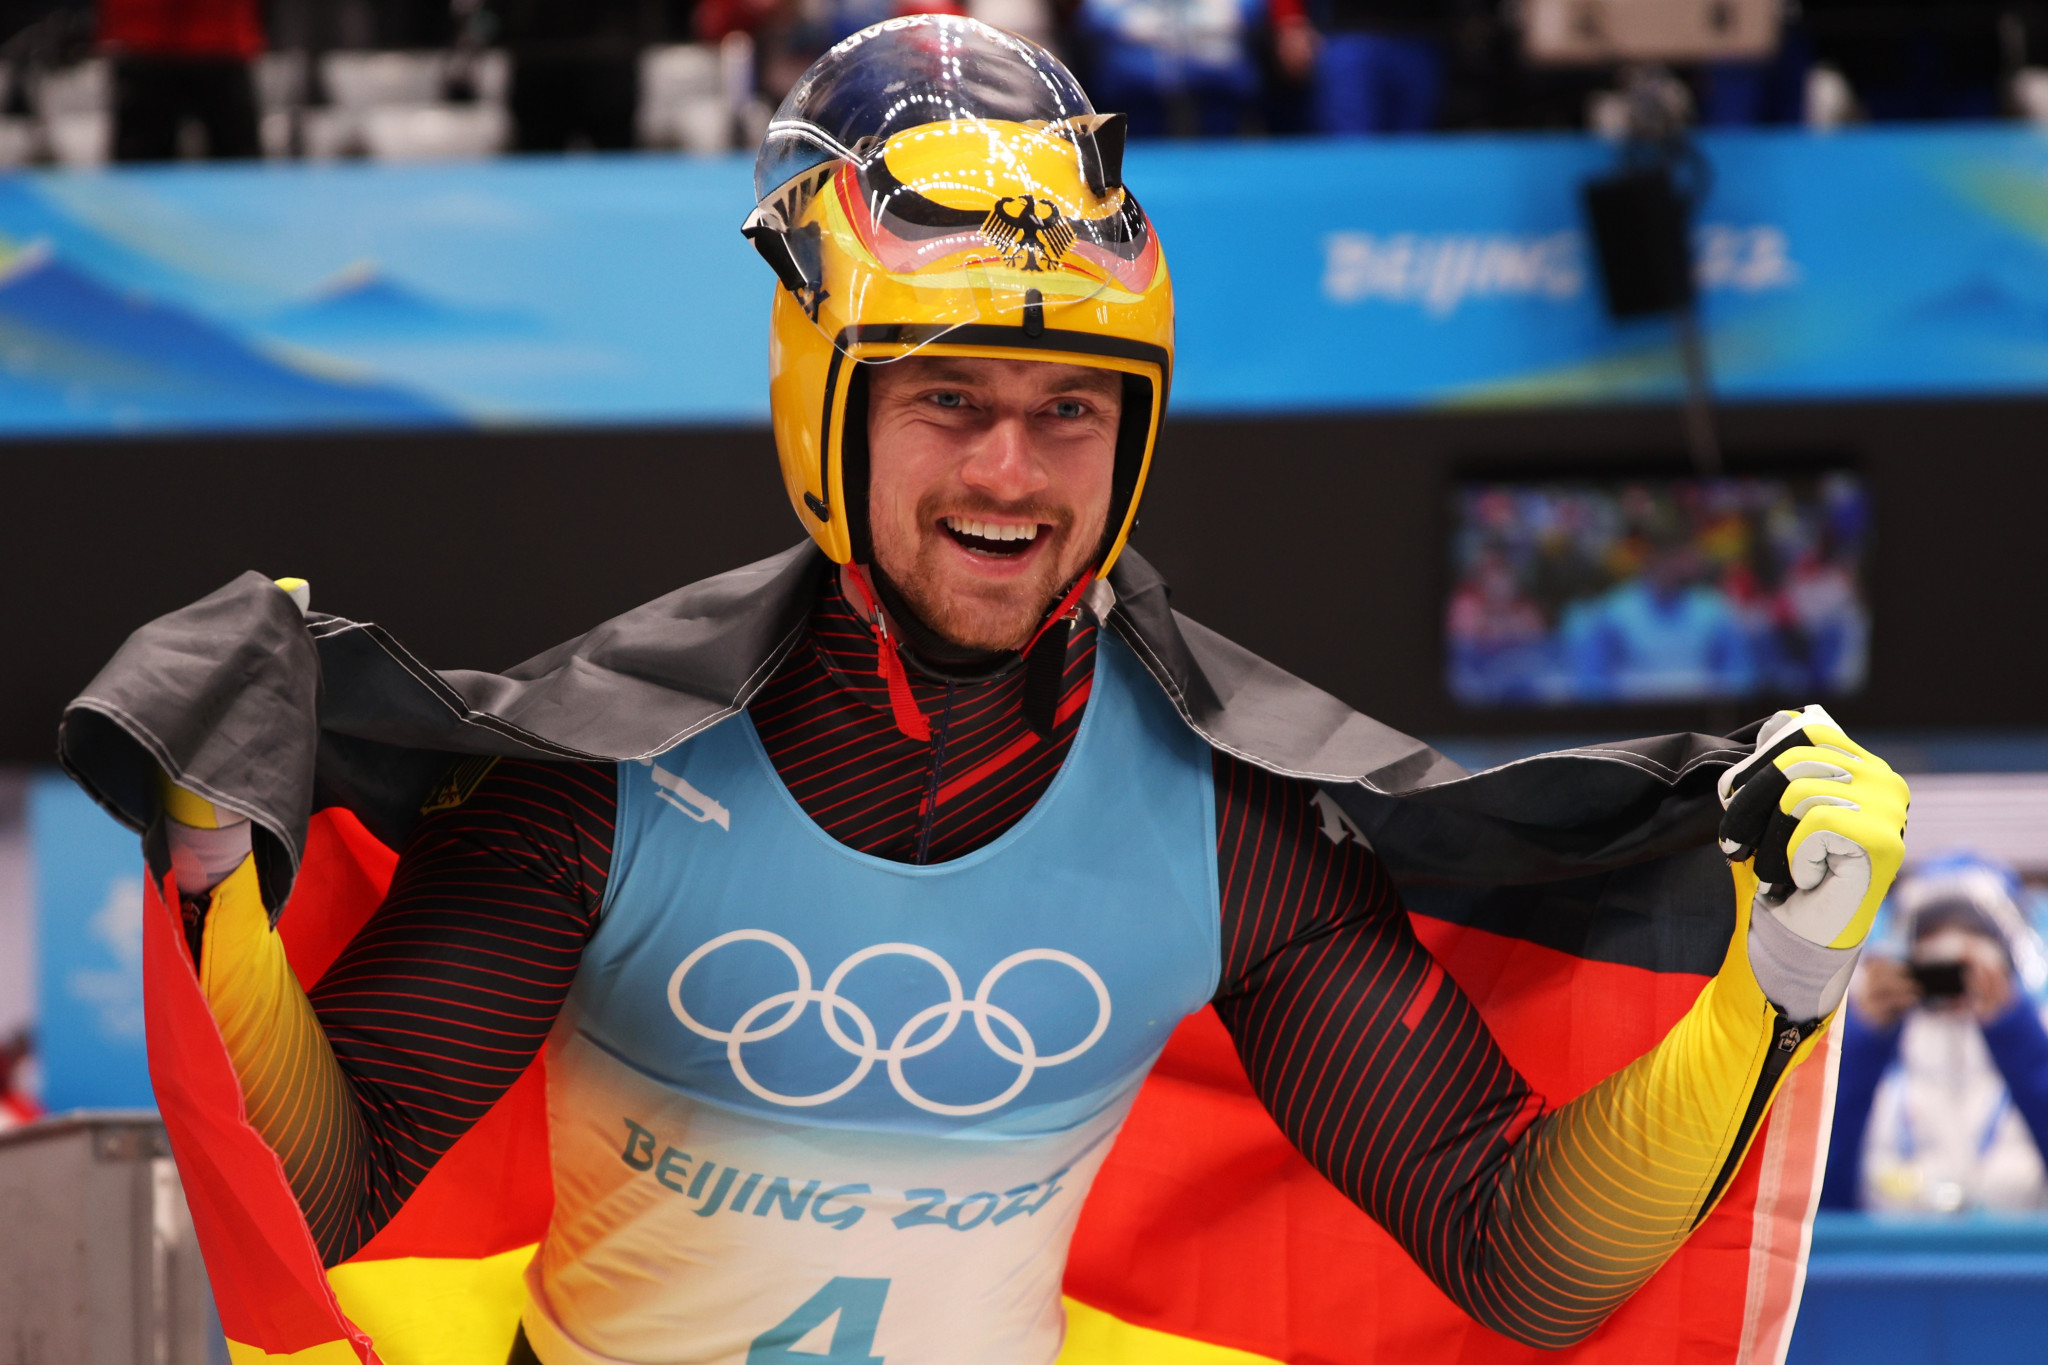 German luger Ludwig caps superb season with Olympic men’s singles gold